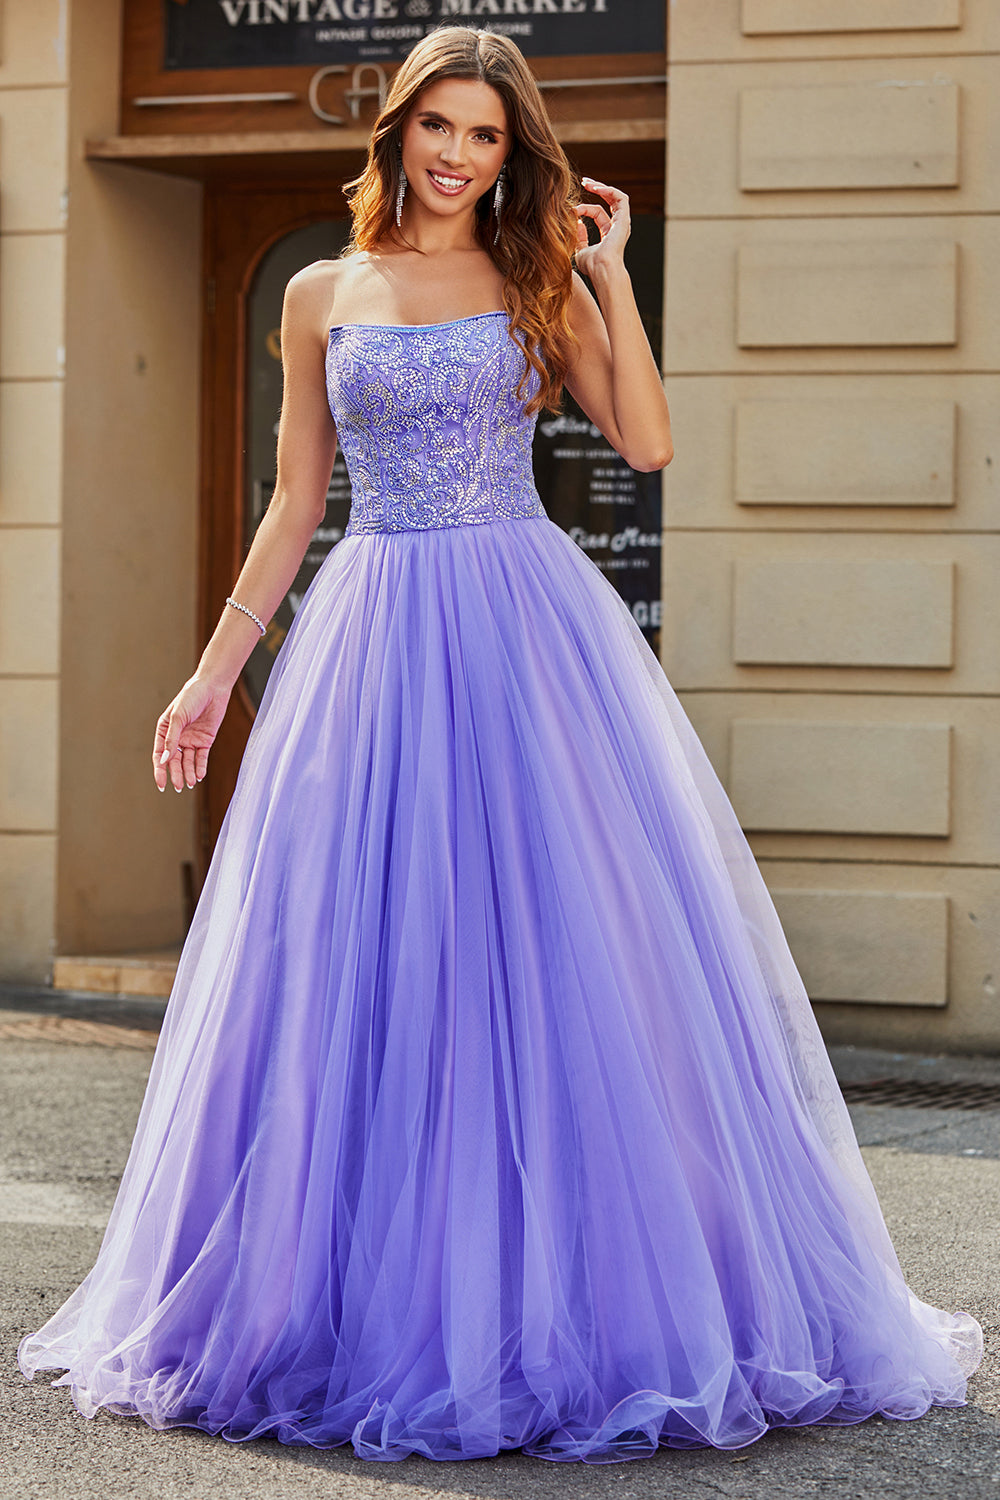 Custom Made Purple Off Shoulder Ball Gown Prom Dress Fabric With Petticoat  For Special Occasions And Quinceaneras From Dressvip, $110.36 | DHgate.Com